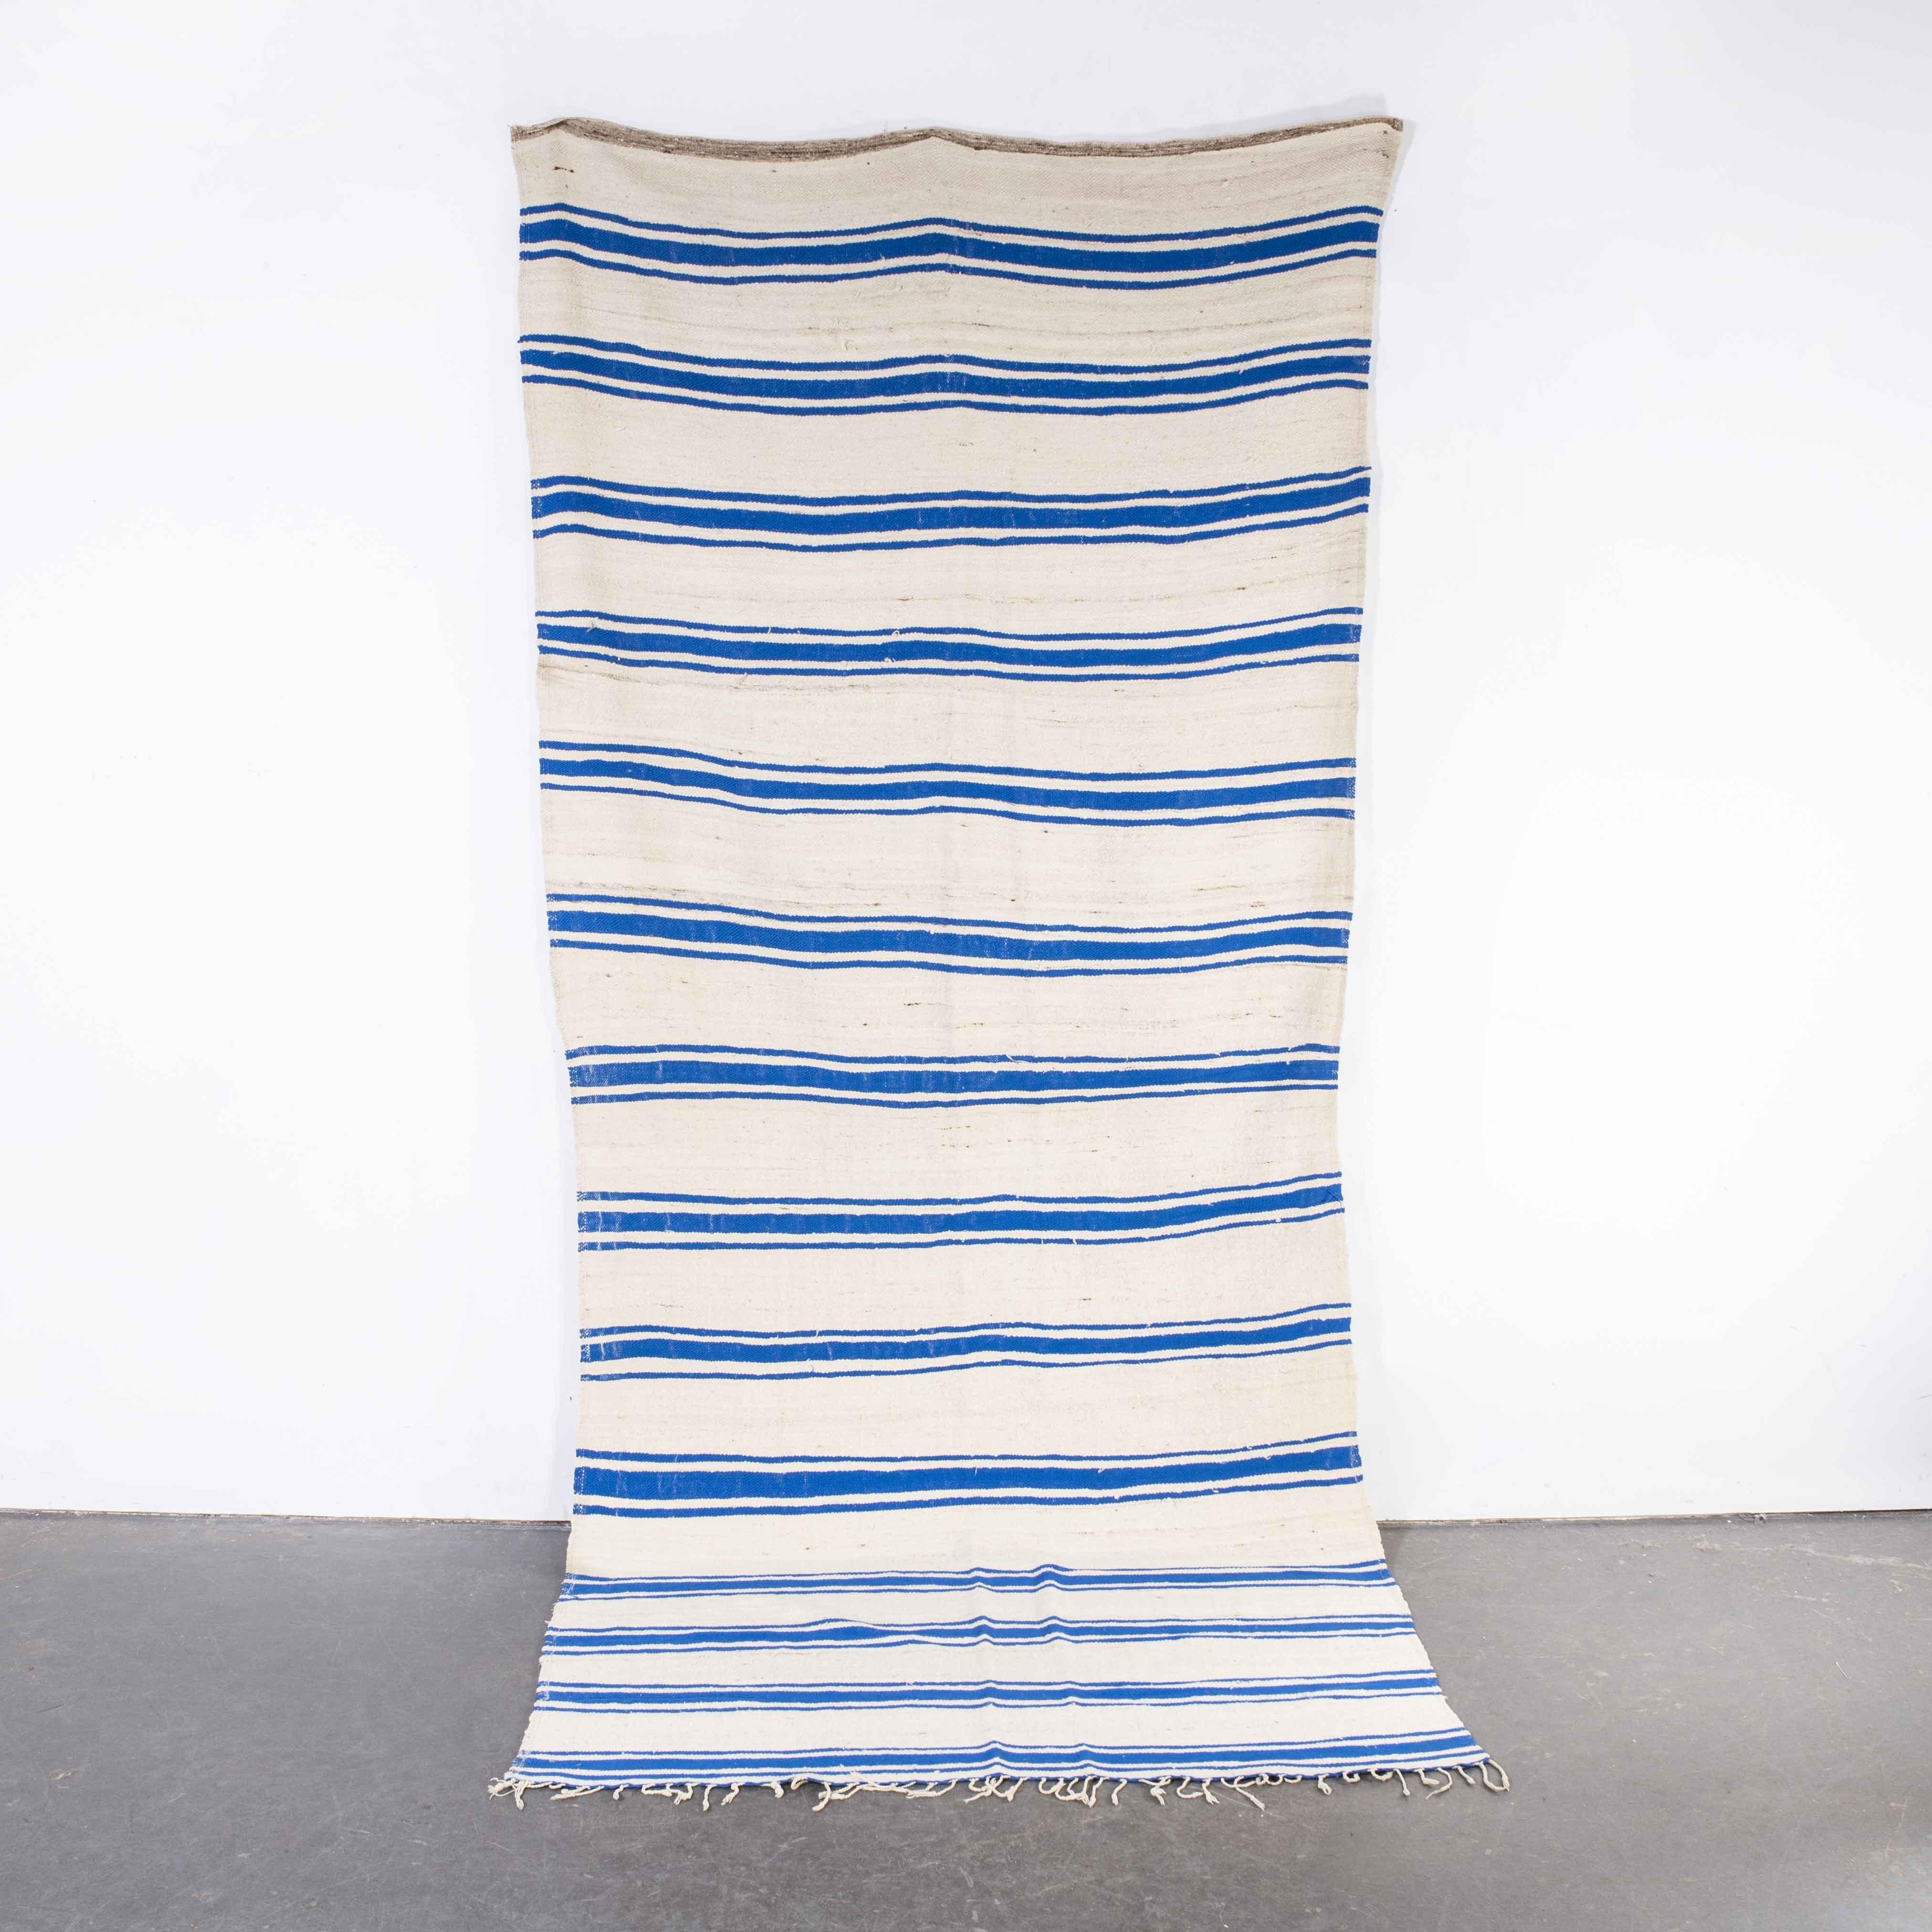 Vintage Berber Blue Stripe Hanbel Rug
Vintage Berber Blue Stripe Hanbel Rug. These are flat-woven rugs (Hanbel in Arabic) which are light in weight due to the lack of pile. They are often used on floors in hotter countries as they are easy to just